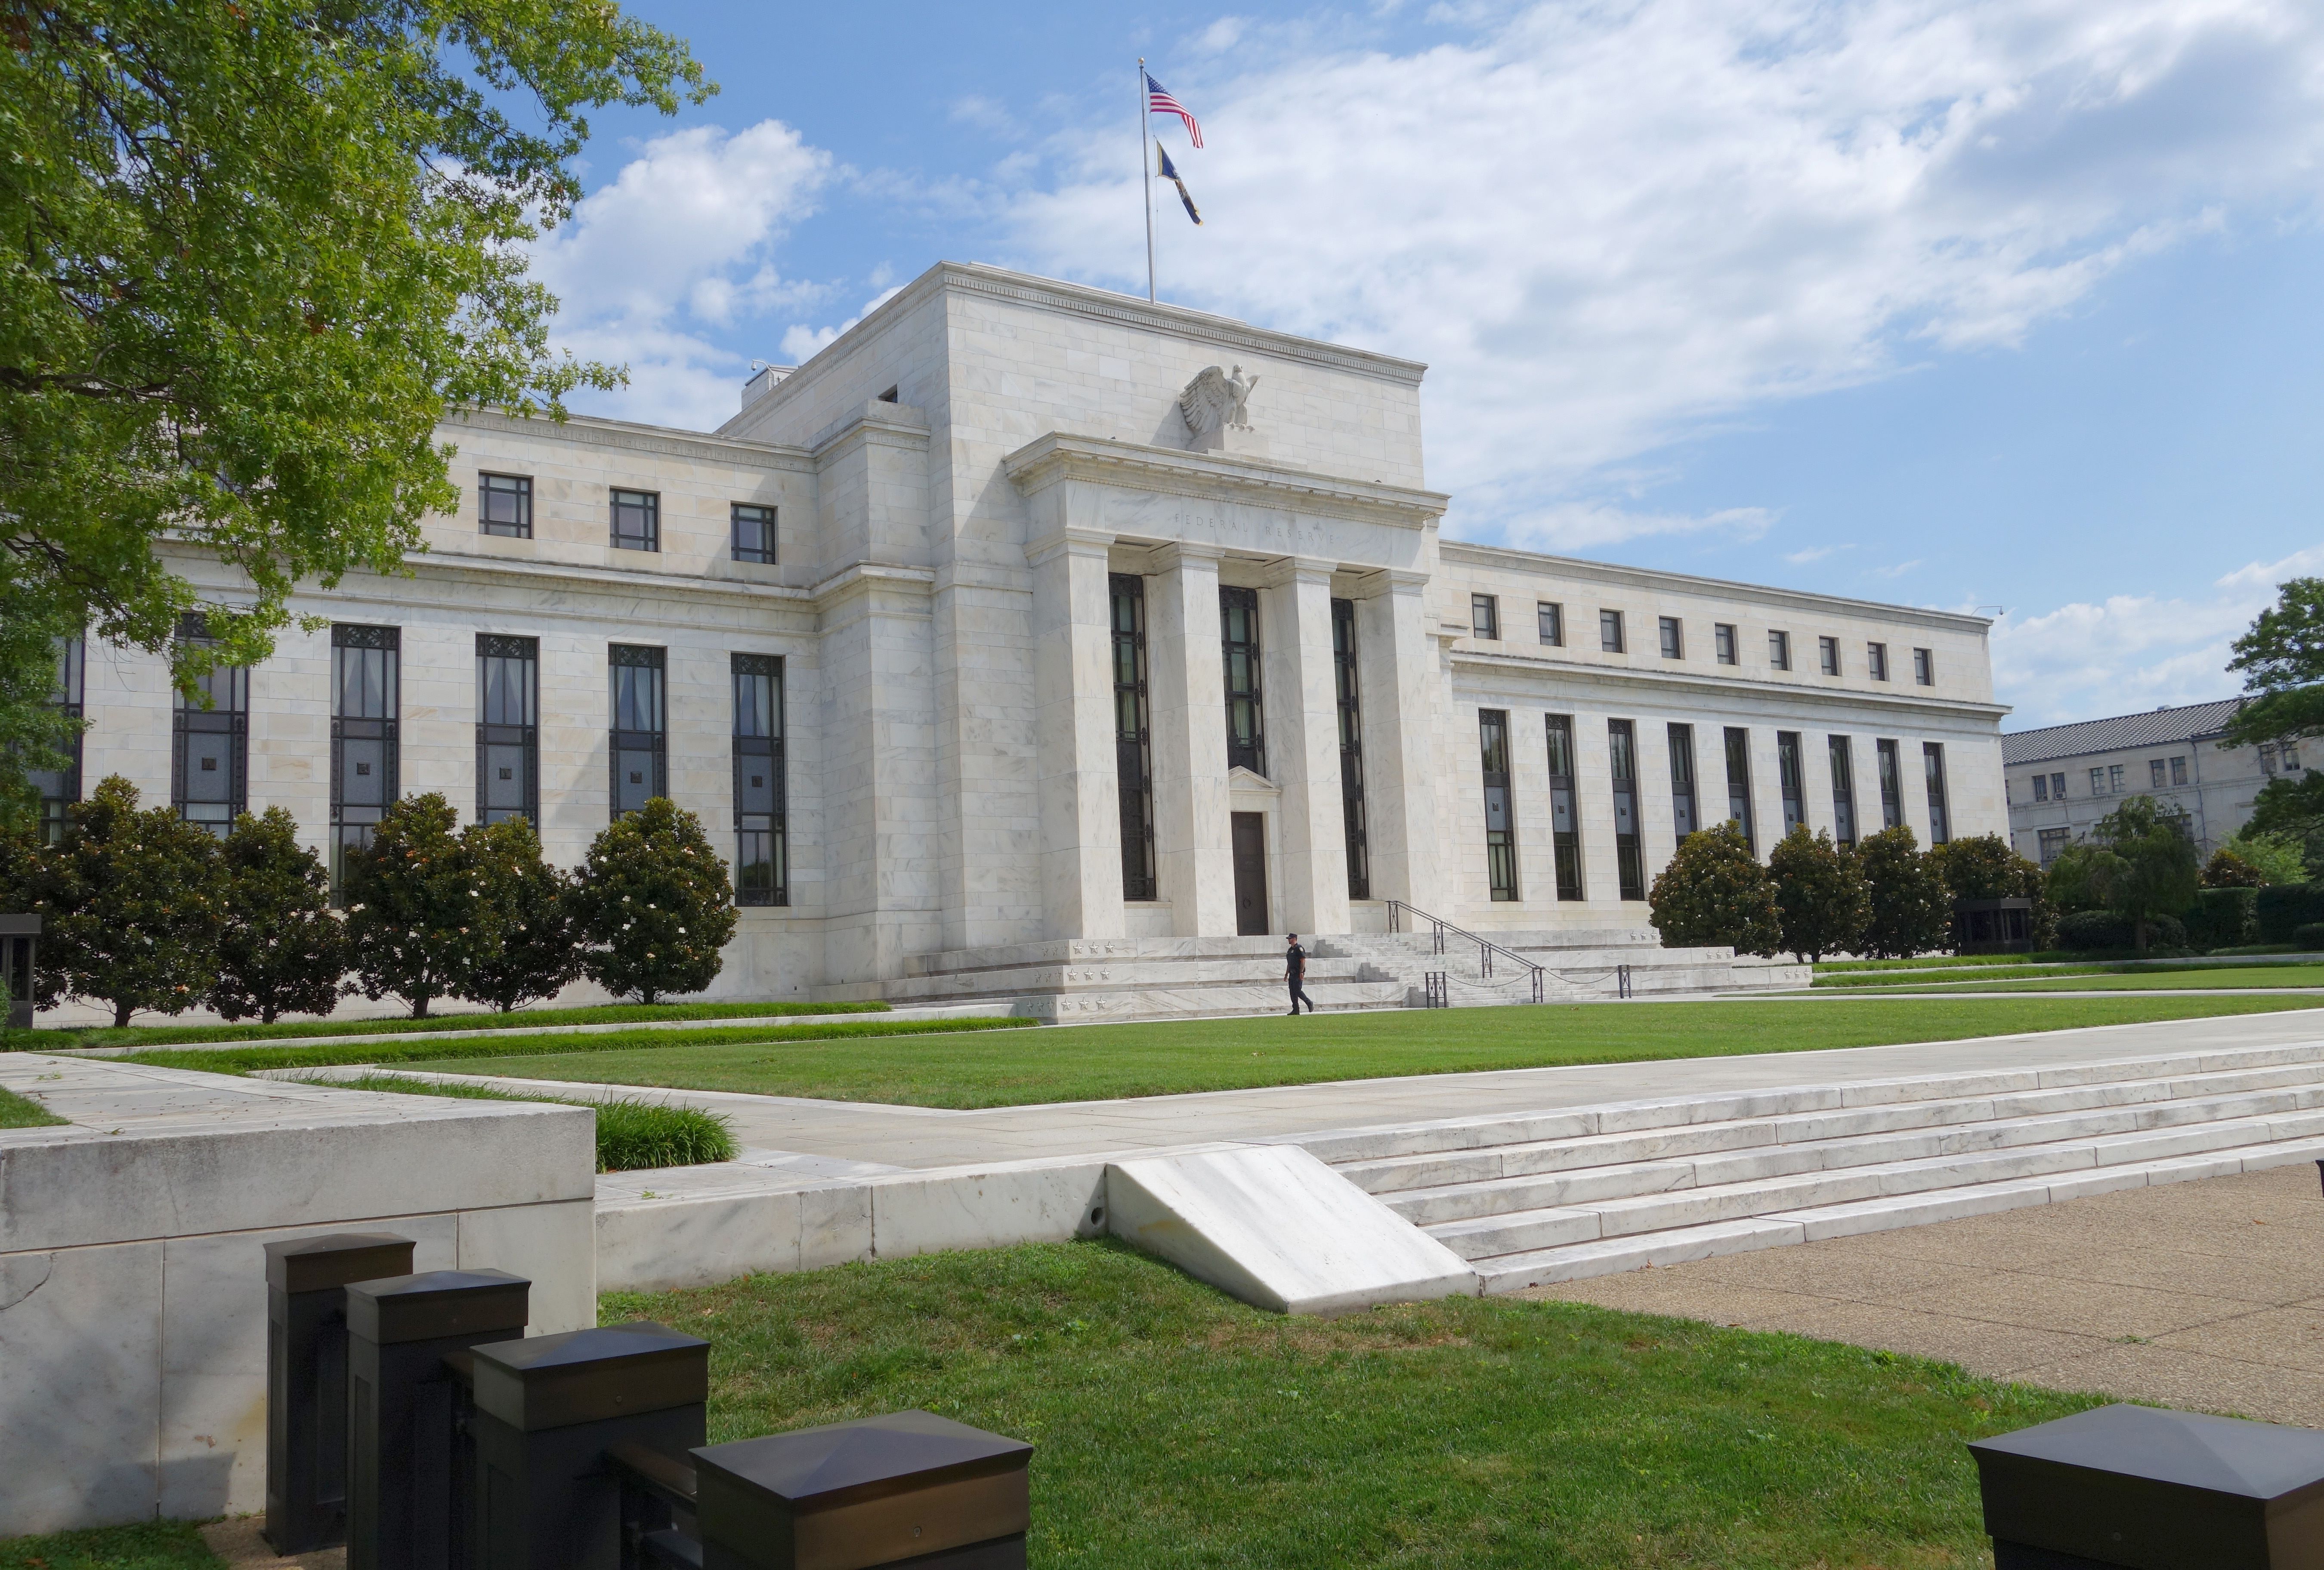 The US Federal Reserve building in Washington, DC. (Getty)